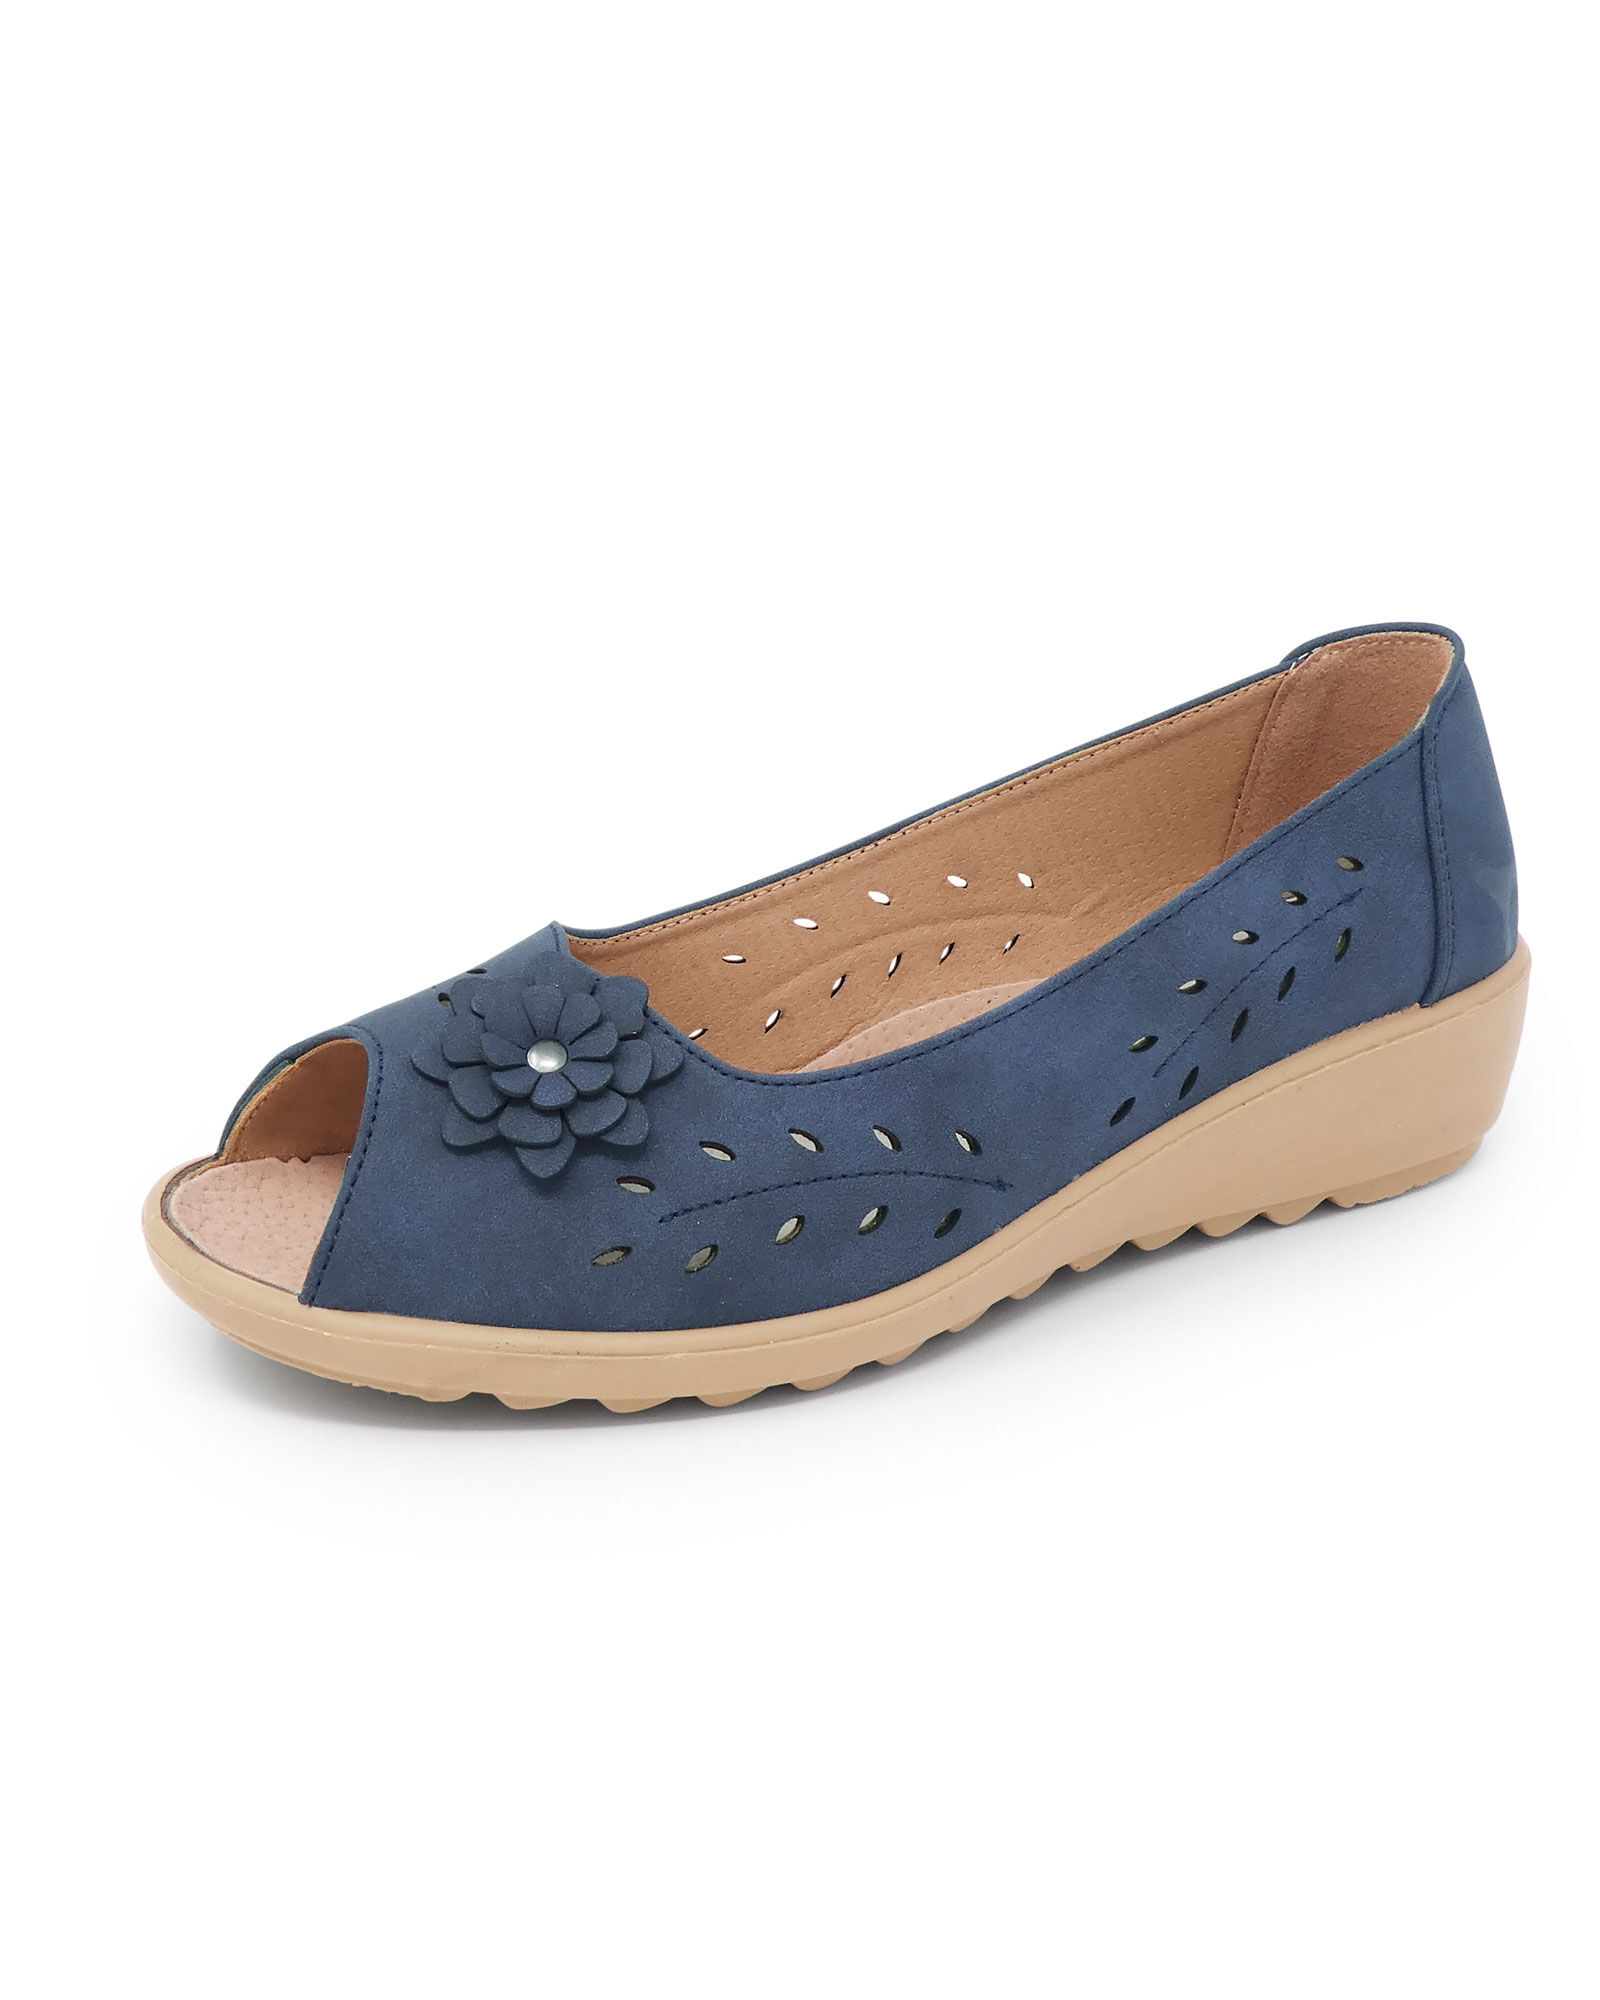 cotton traders ladies shoes